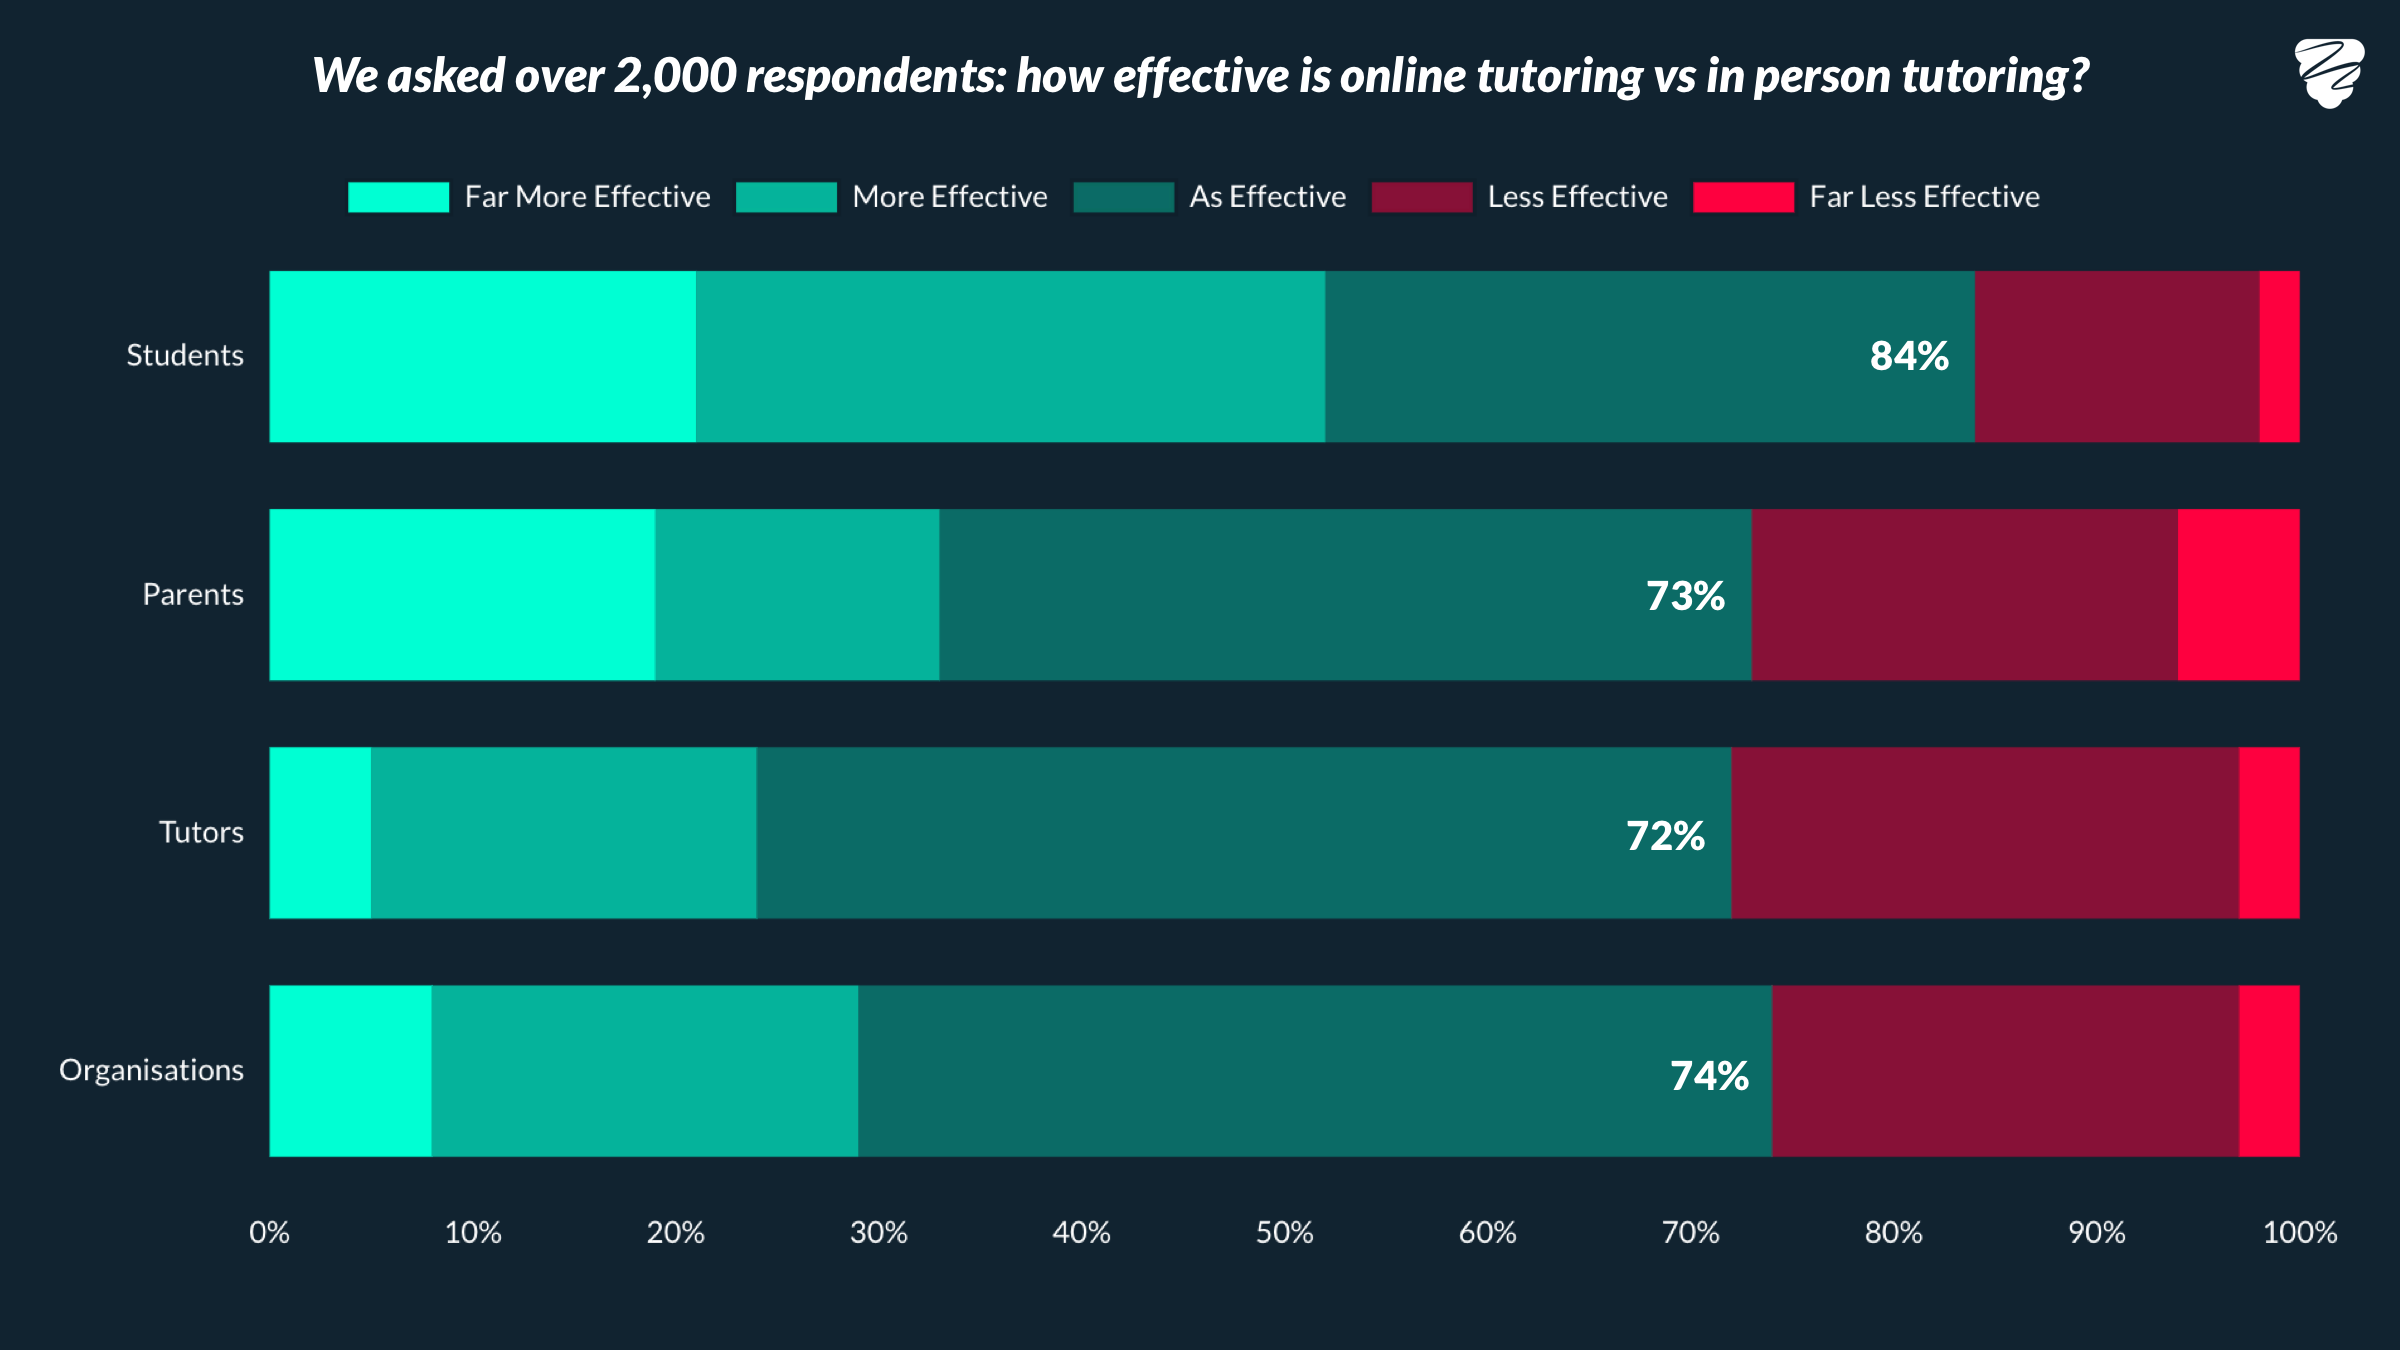 survey results showing 84% of students find online tutoring more effective or as effective